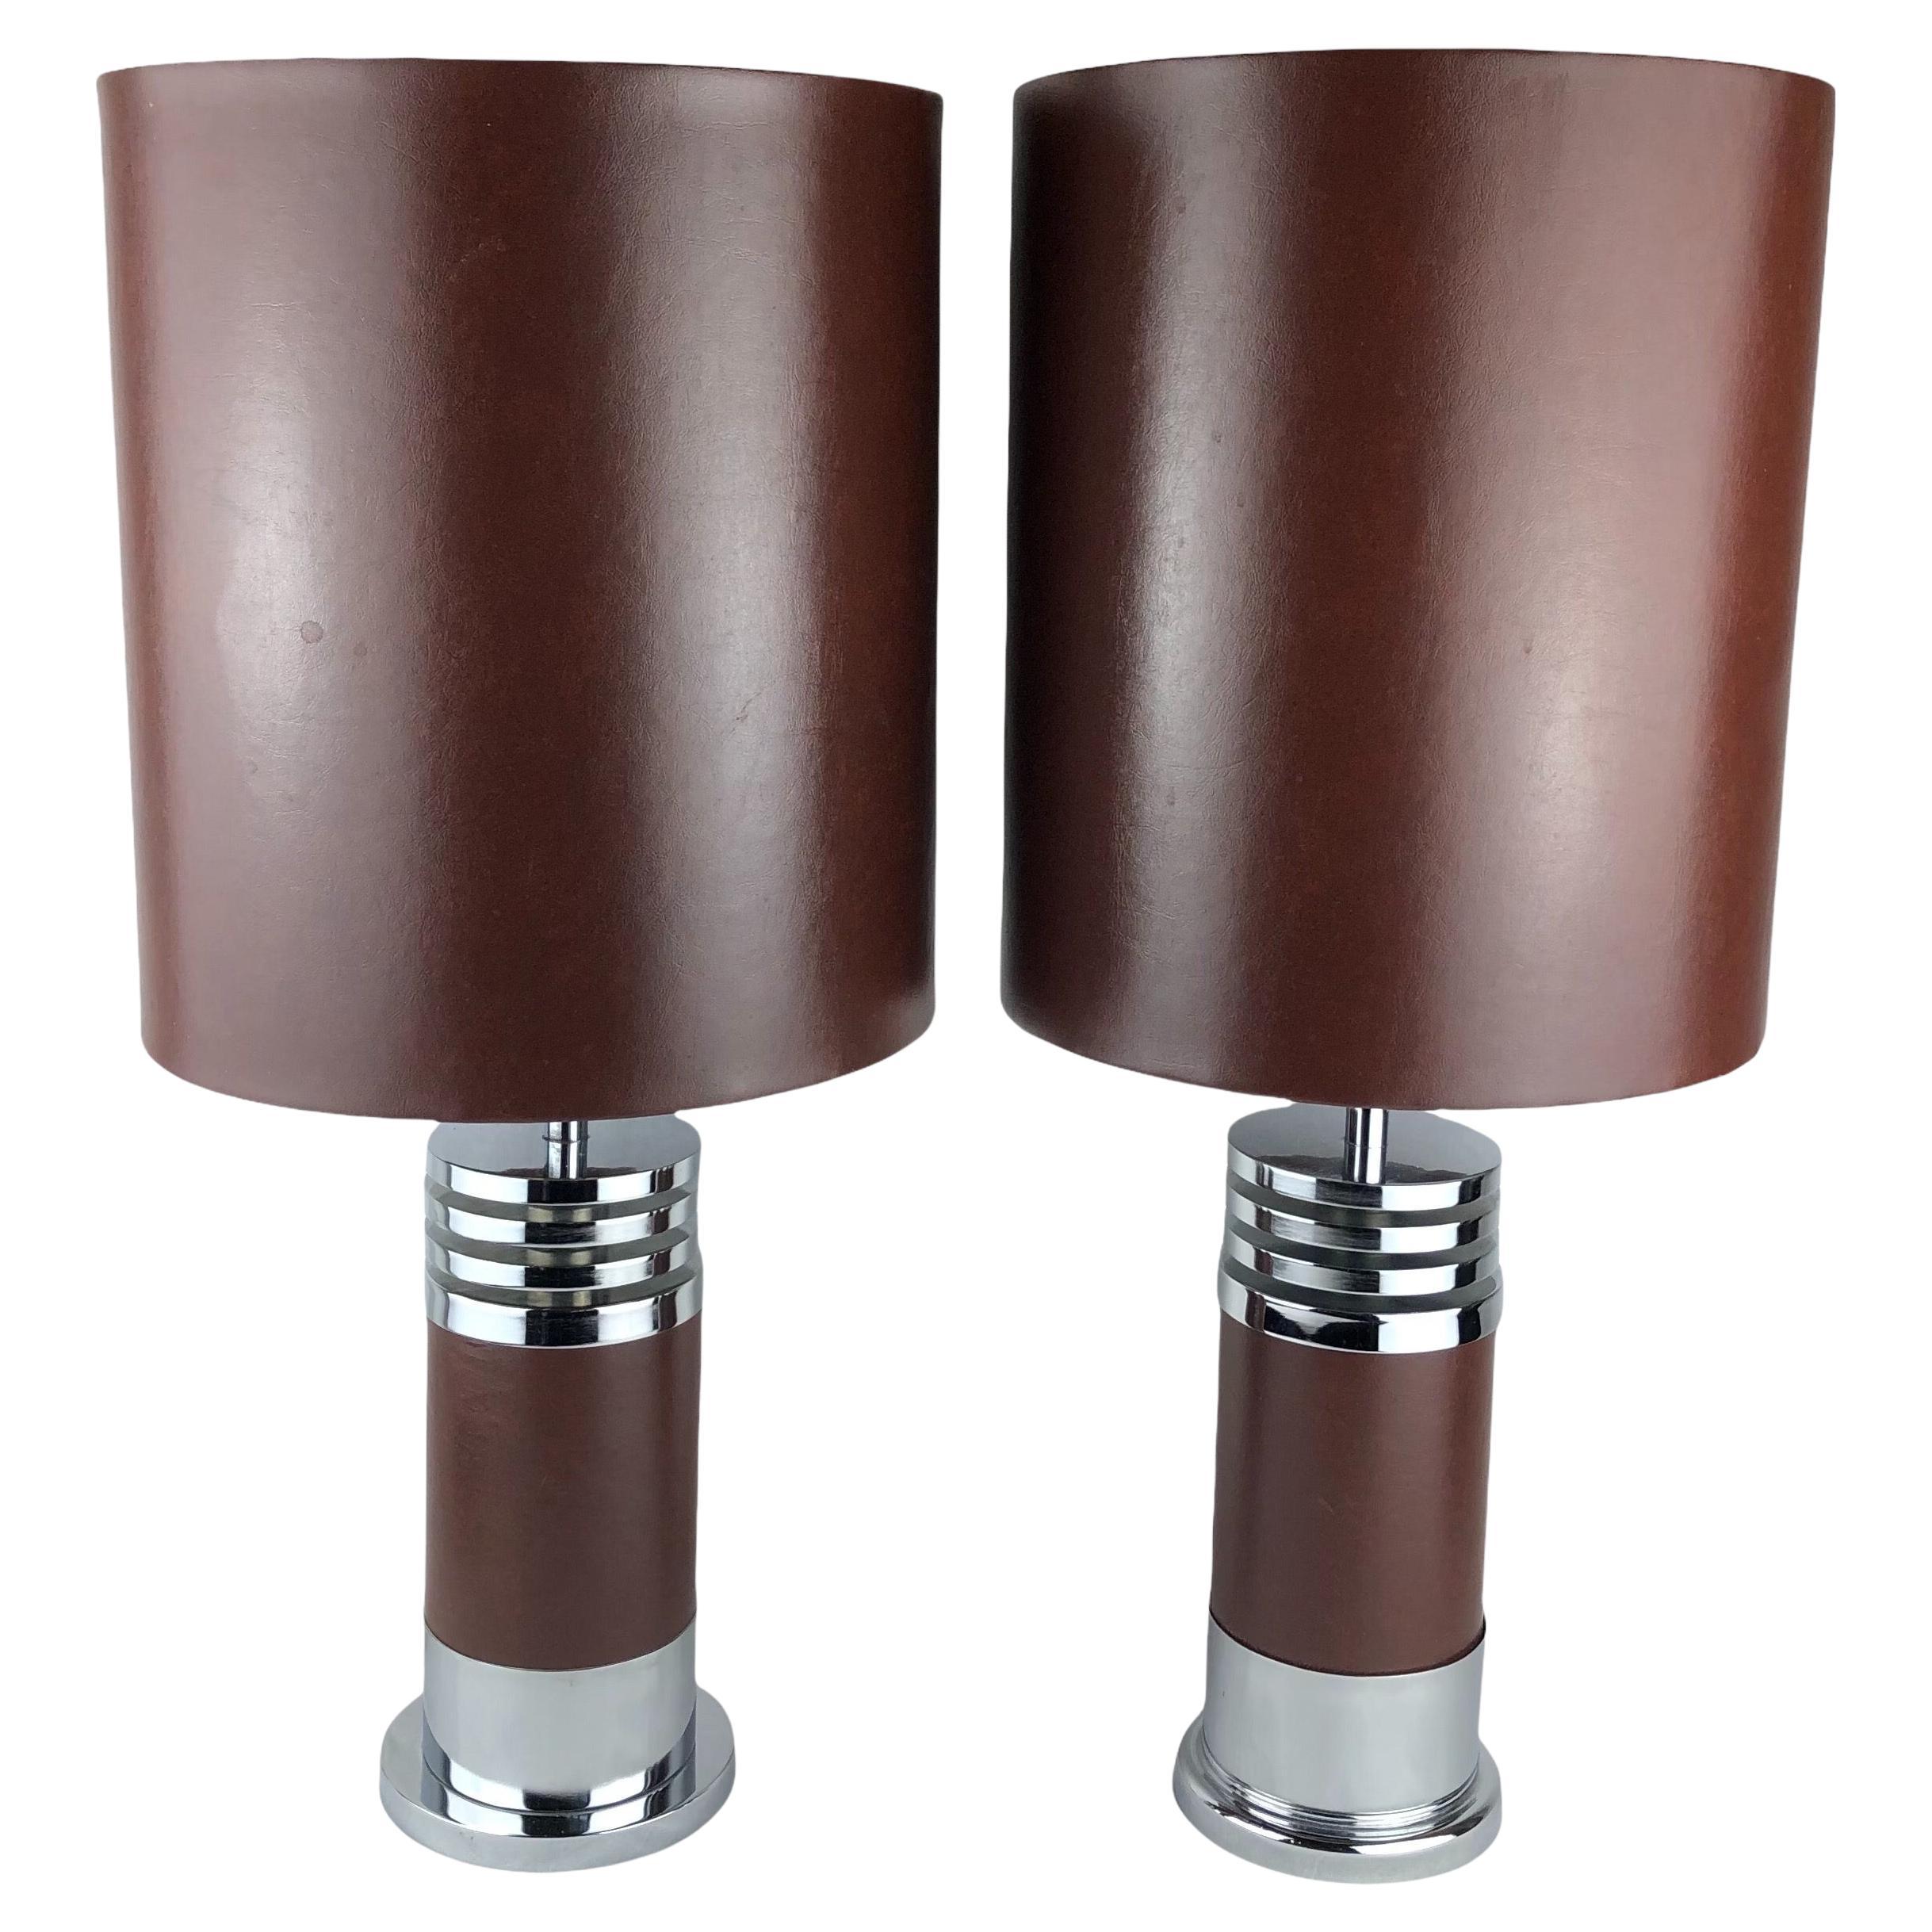 Pair of Table Lamps from Roche Bobois Designs, circa 1975 For Sale